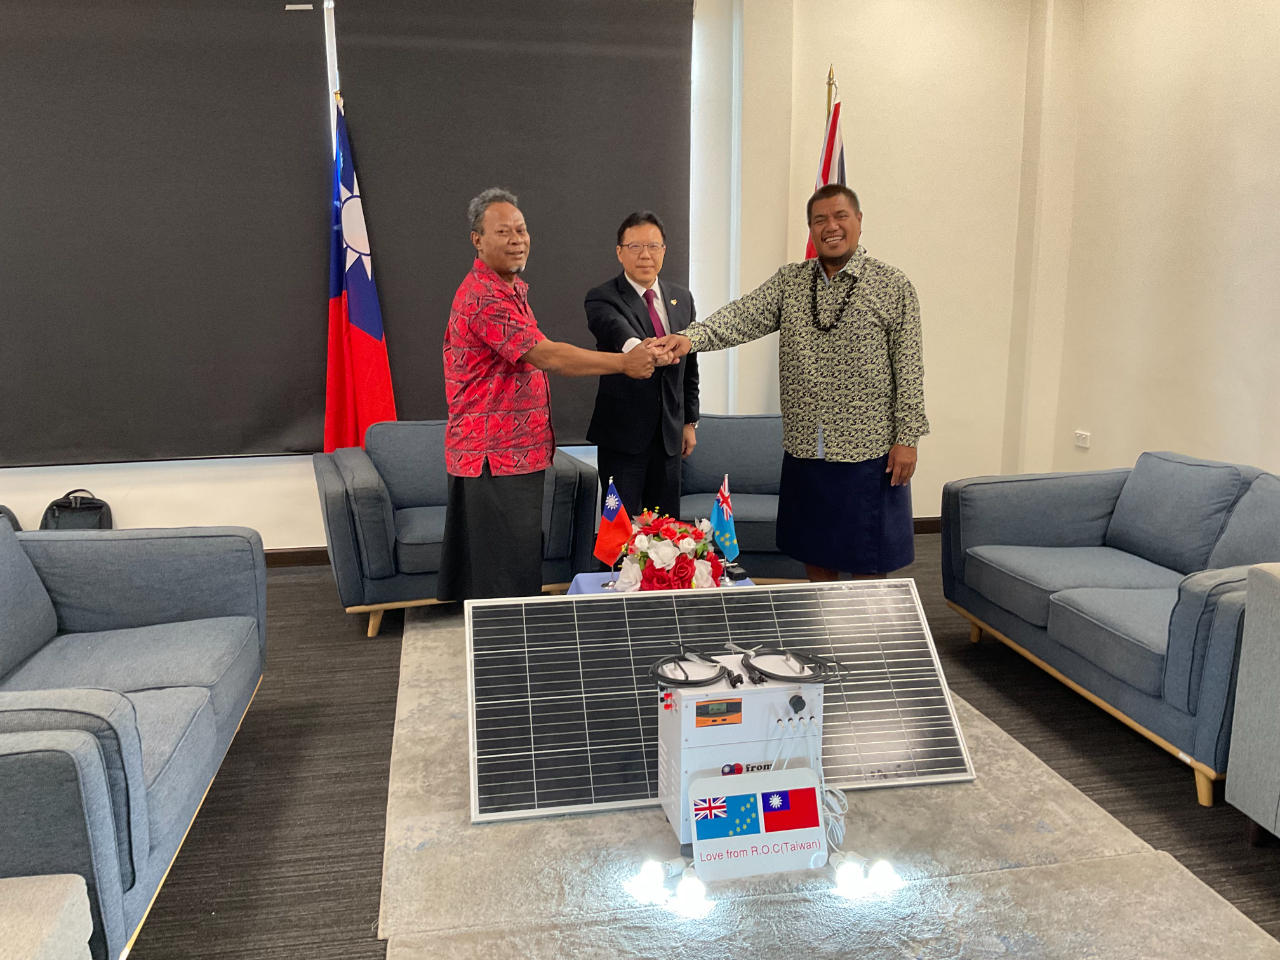 Donation of 220 solar home system units and 15 solar LED street lamps to the Government of Tuvalu at Rt. Hon. Sir. Tomasi Puapua Convention Center on November 11th, 2021.
Acting Prime Minister Hon. Ampelosa Tehulu, Minister for Transport, Energy and Tourism Hon.Nielu Meisake and related officials joined the ceremony.
